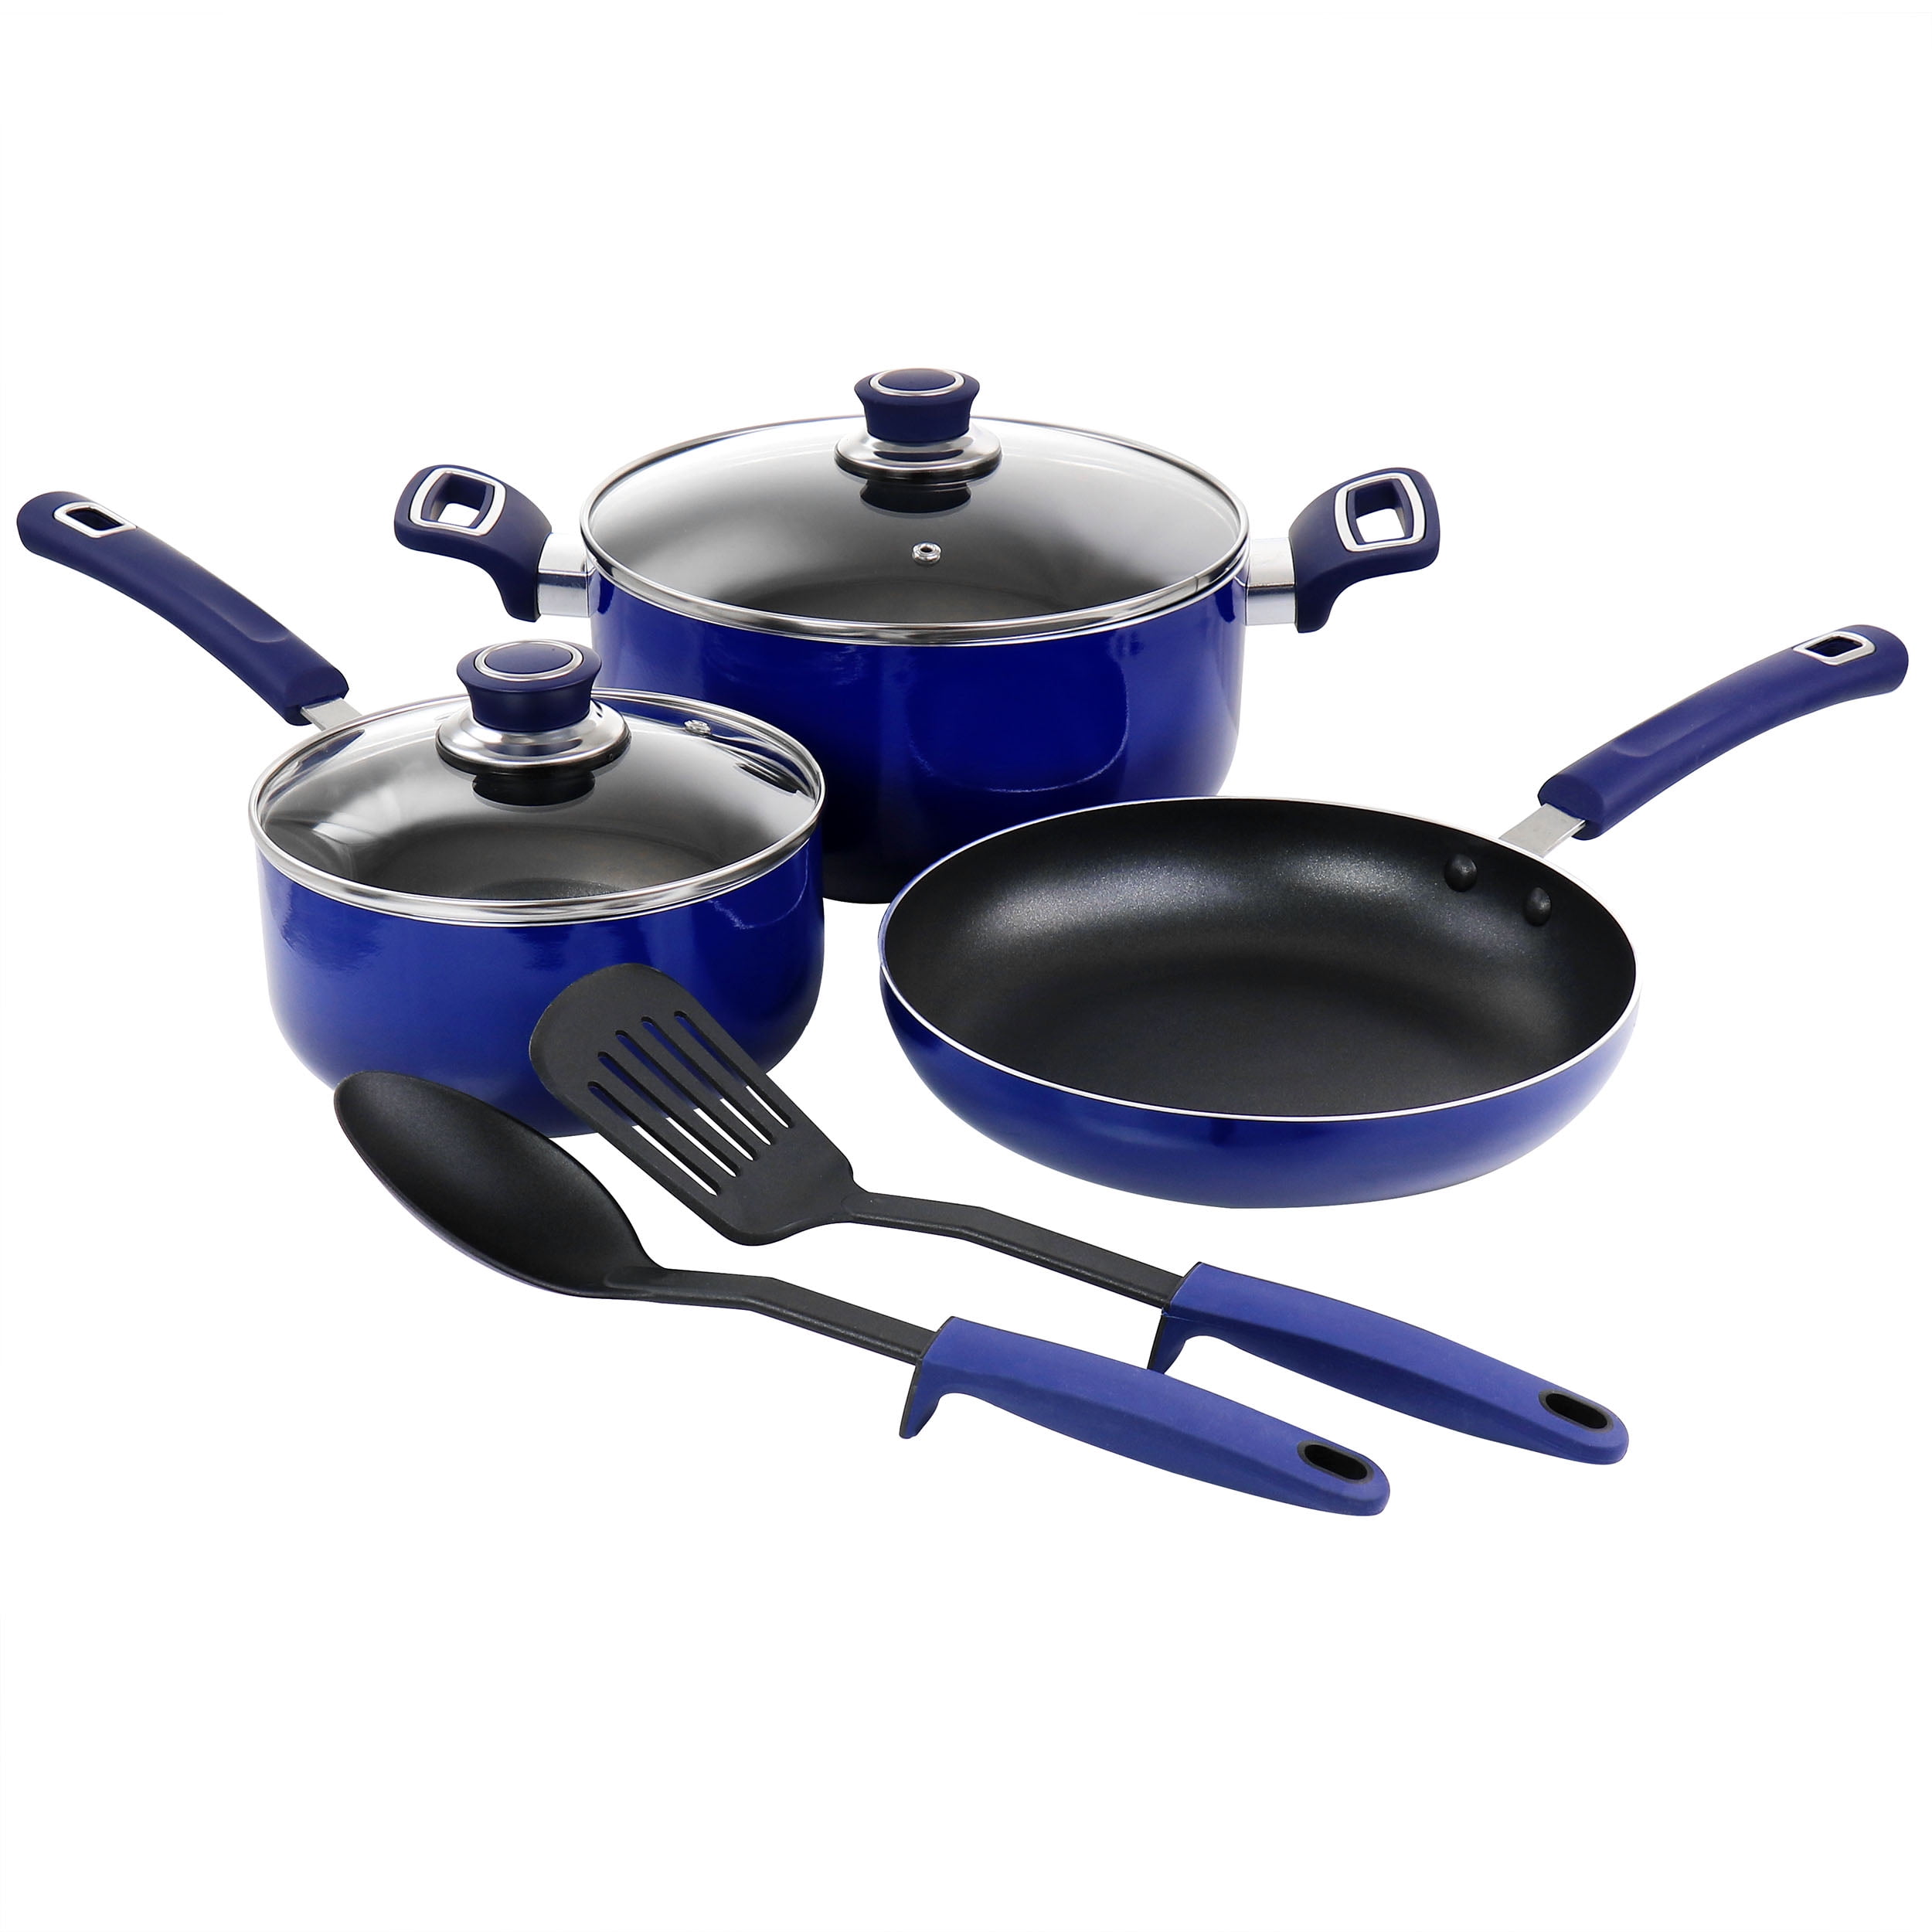 Oster Lynhurst 12pc Nonstick Aluminum Cookware Set with Tools